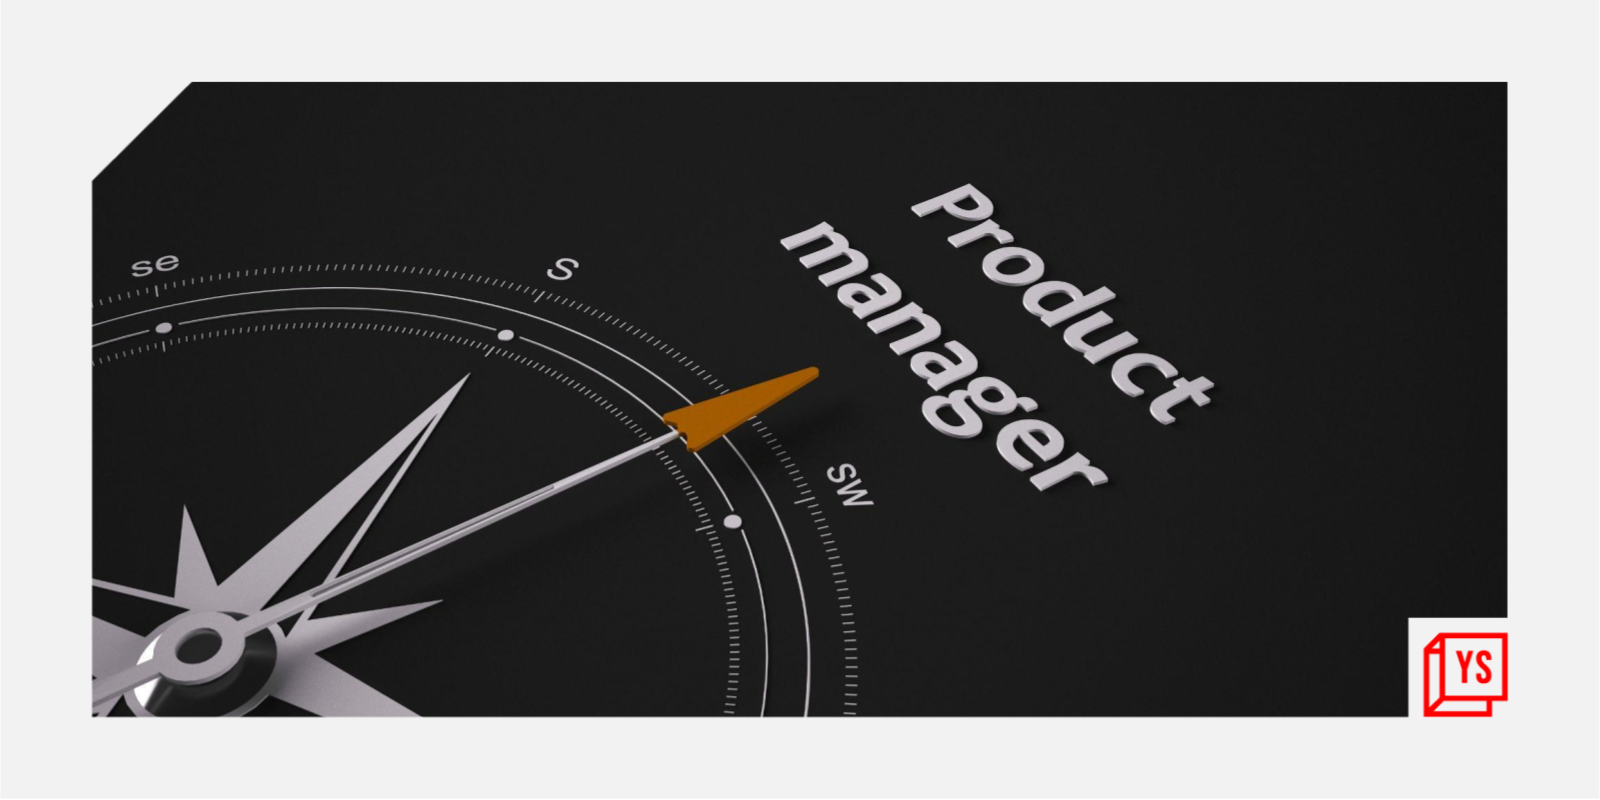 All you need to know about being a product manager

